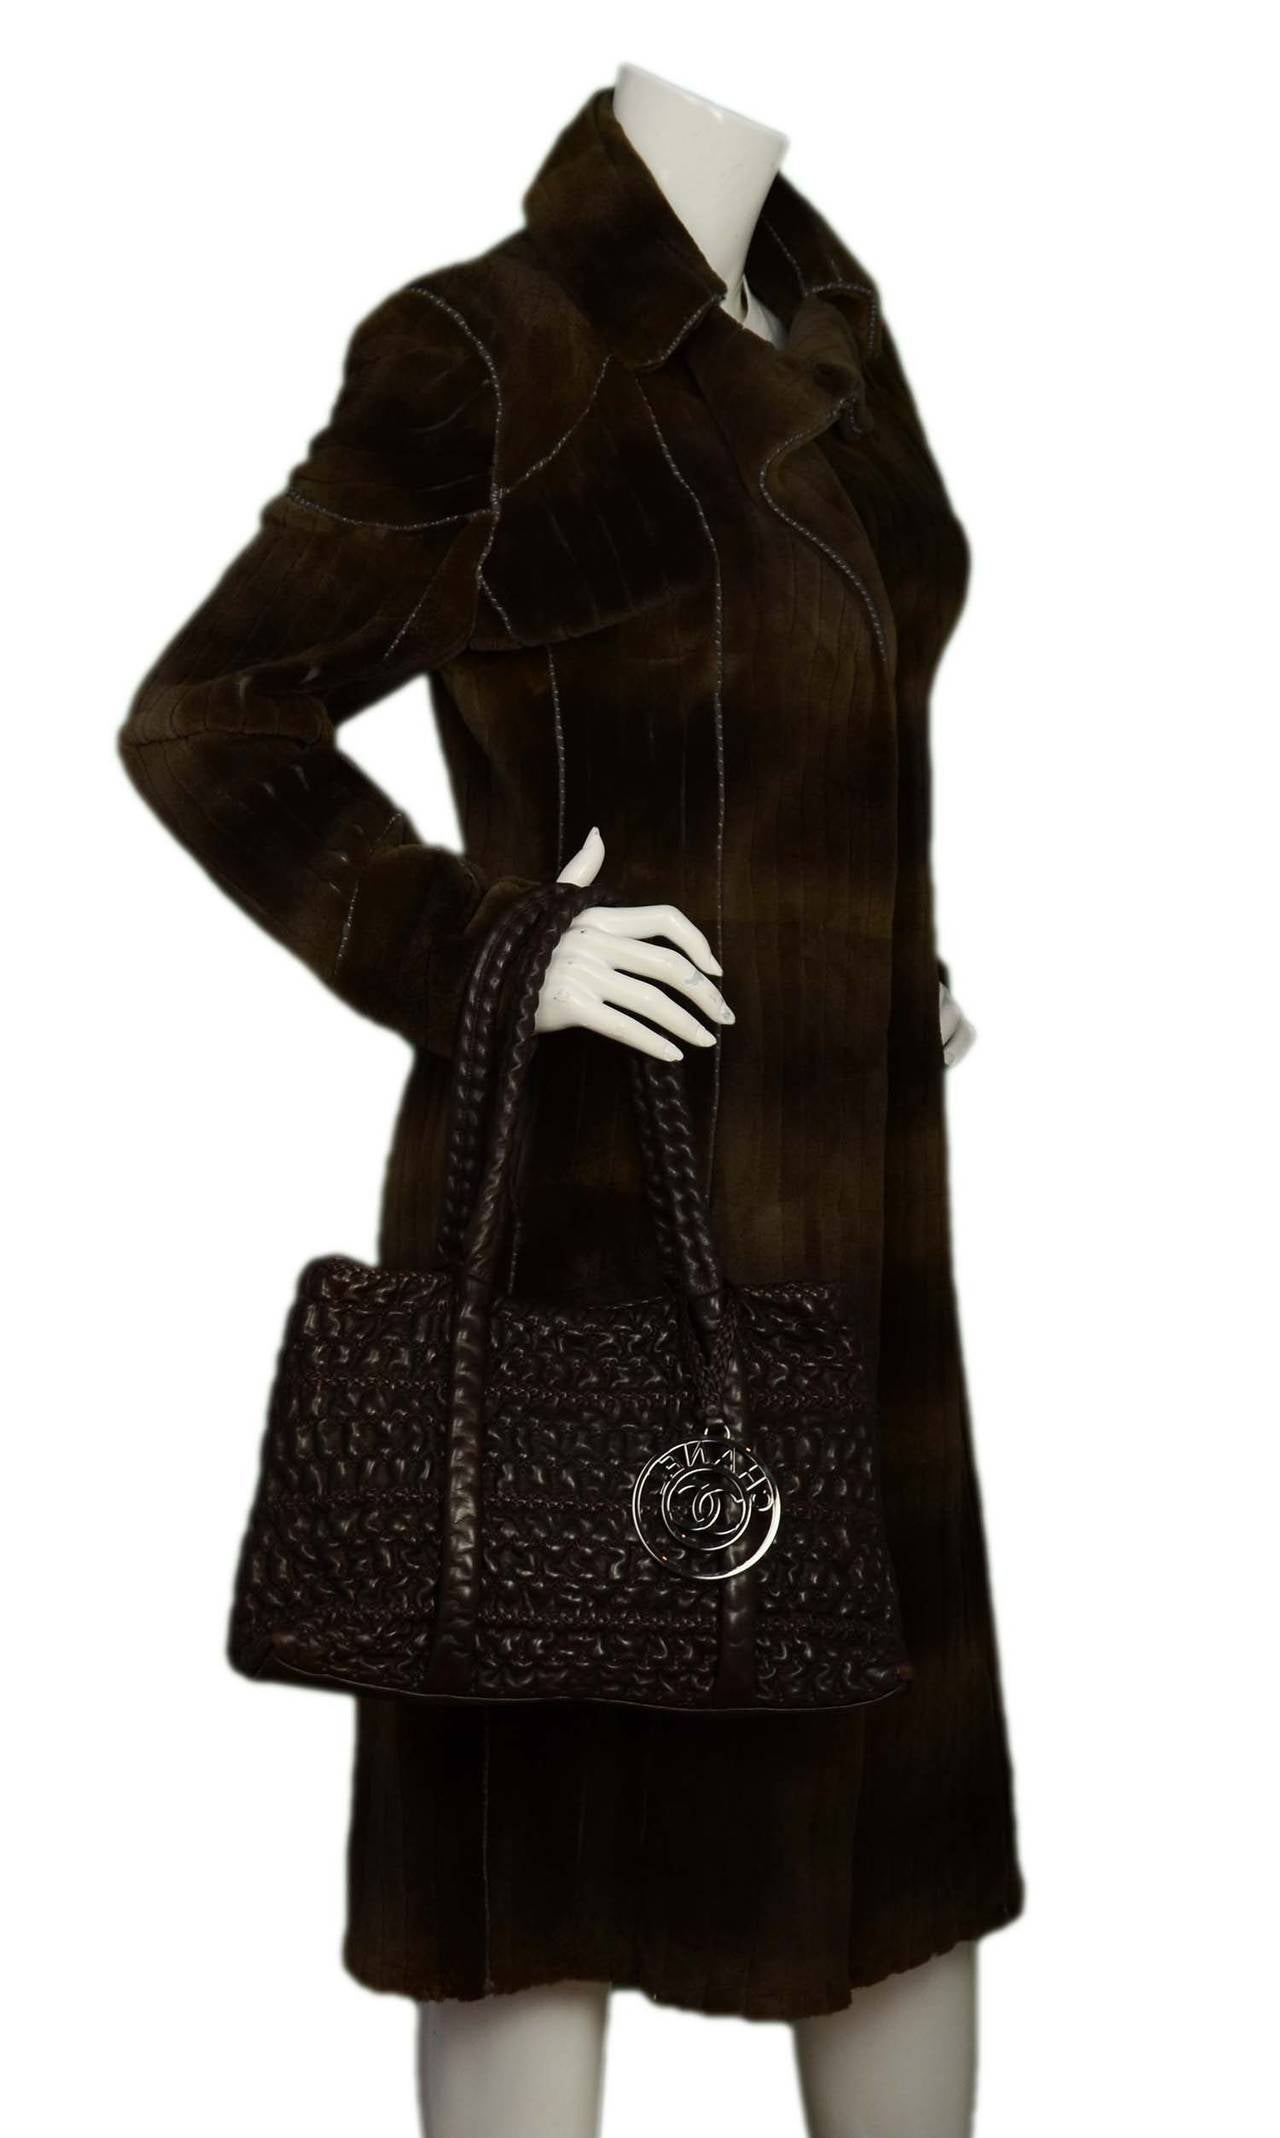 Chanel 2009 Brown Puckered Leather Bag with Covered Chain Straps & CC Medallion 6